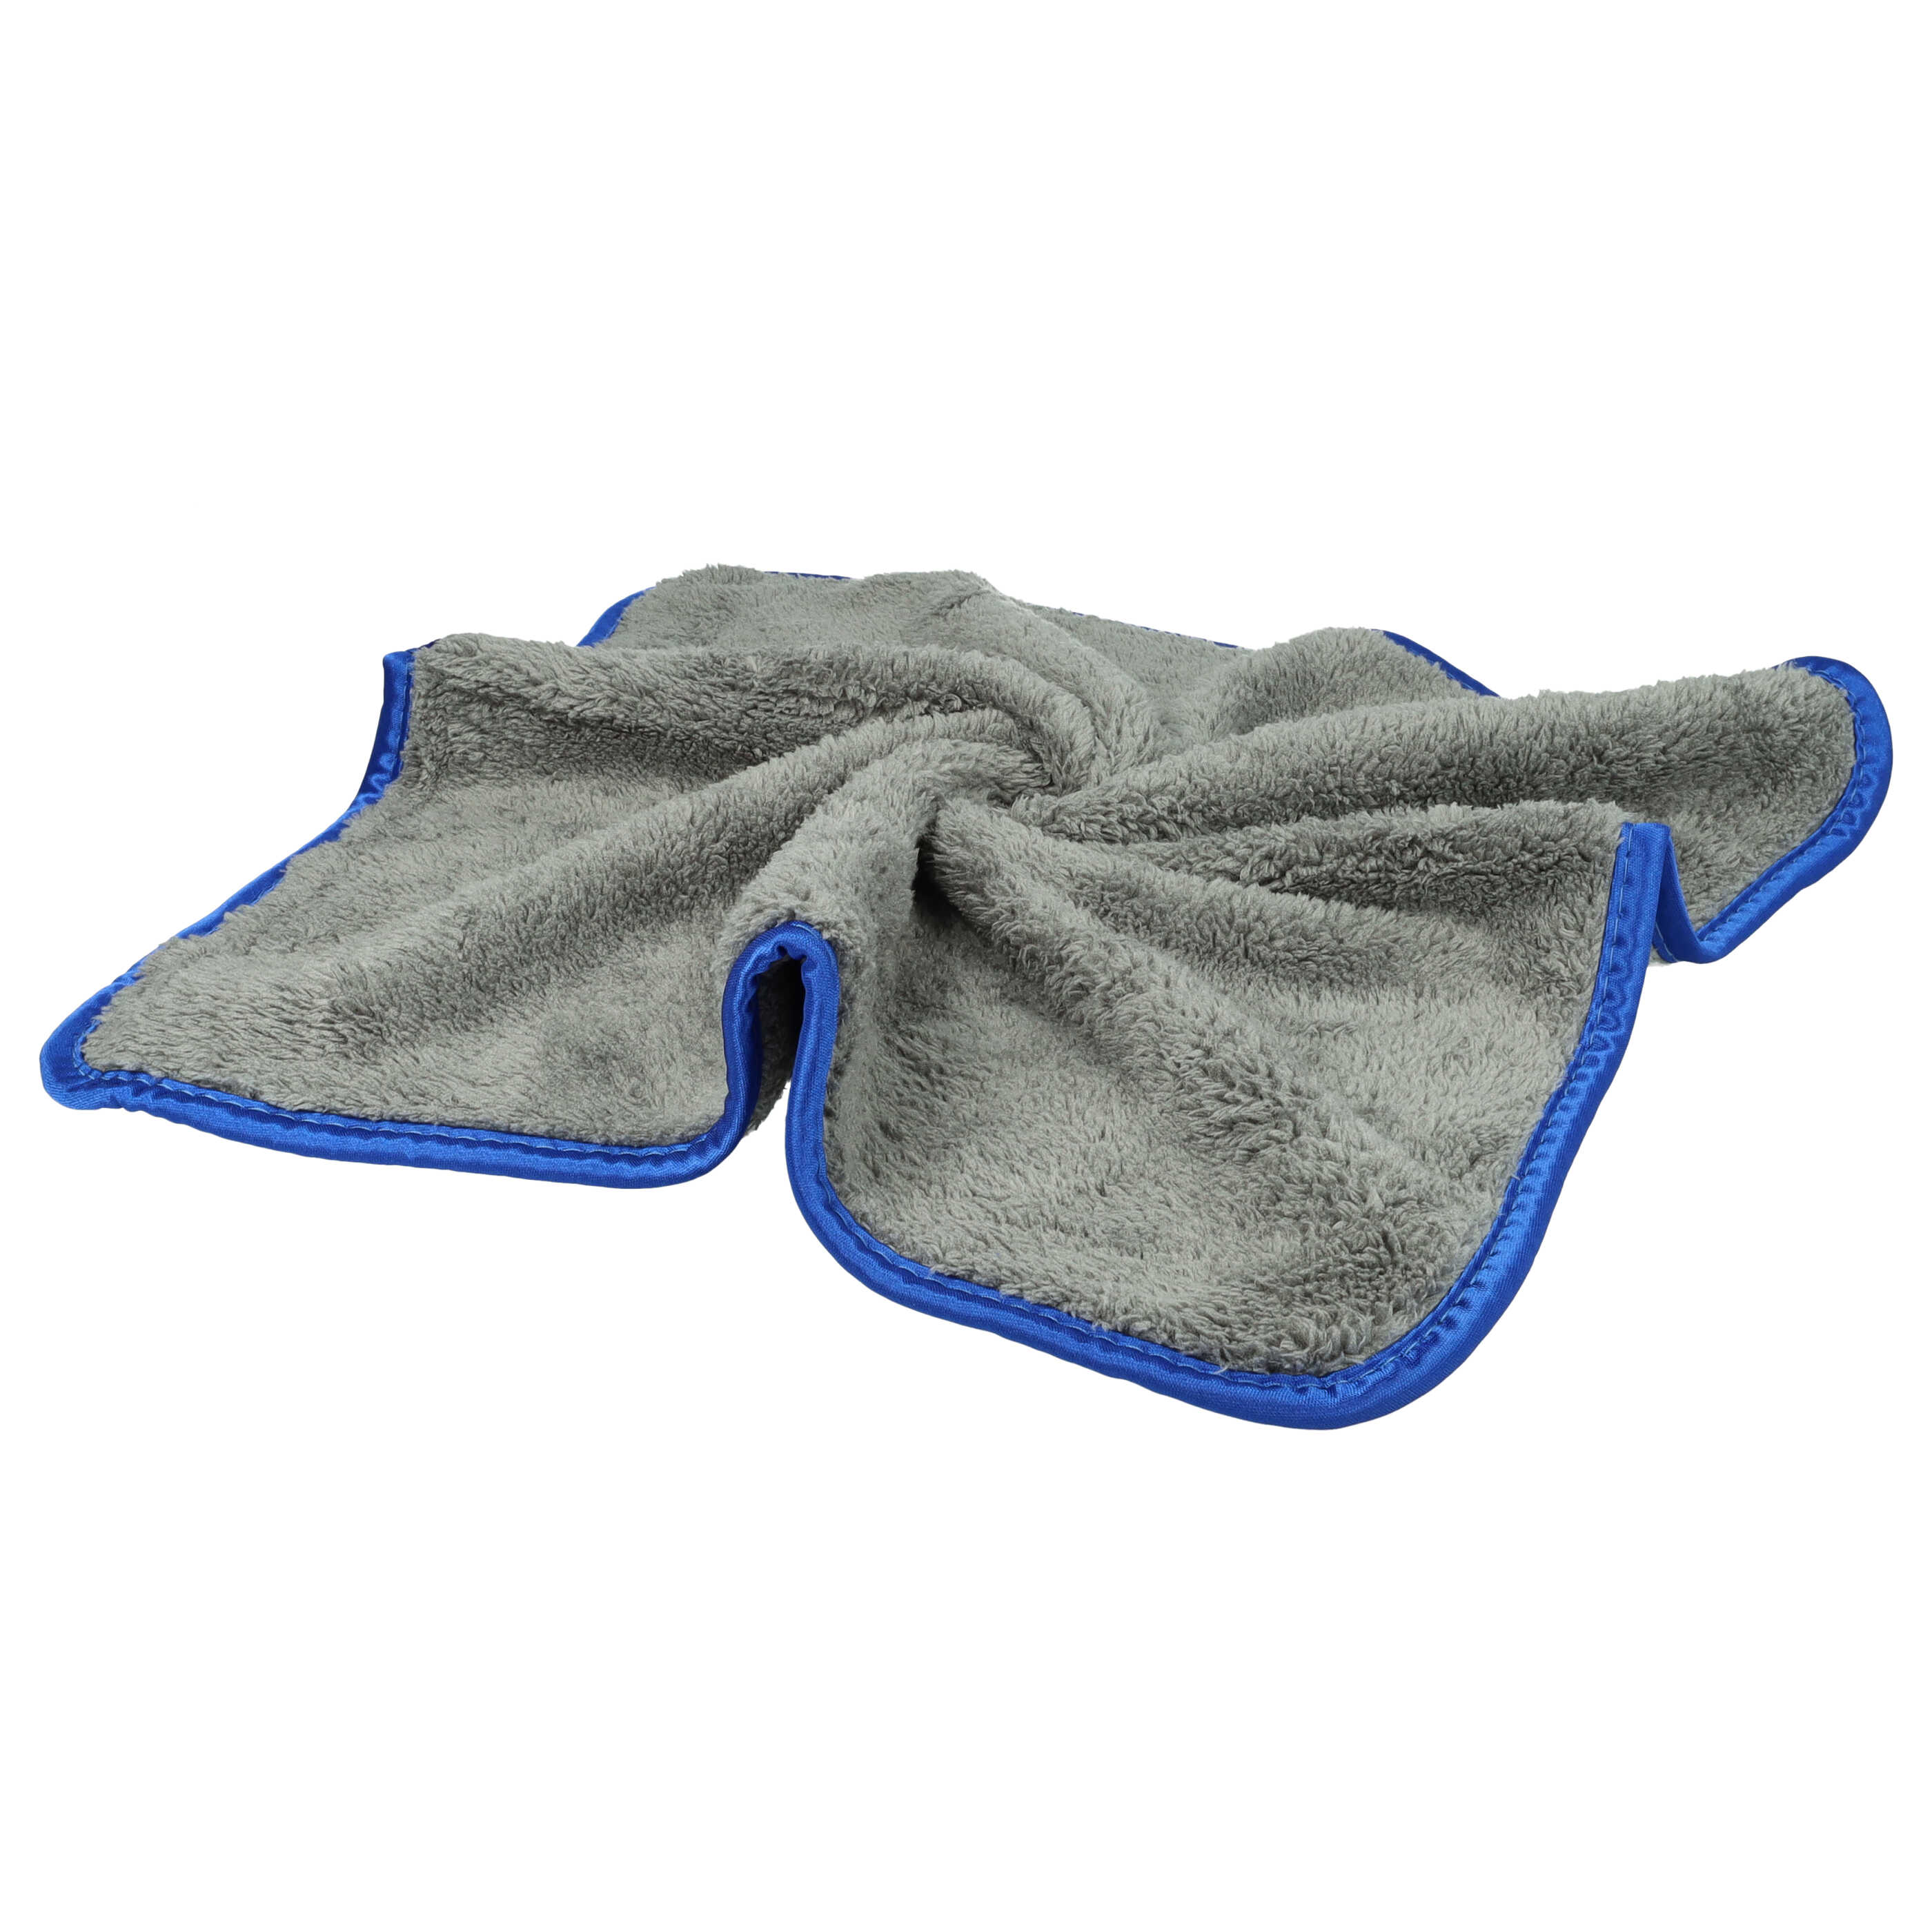 Microfibre Towel Set (3 Part) for Cars and Motorcycles - 40 x 40 cm, Reusable, Blue, Dark Grey